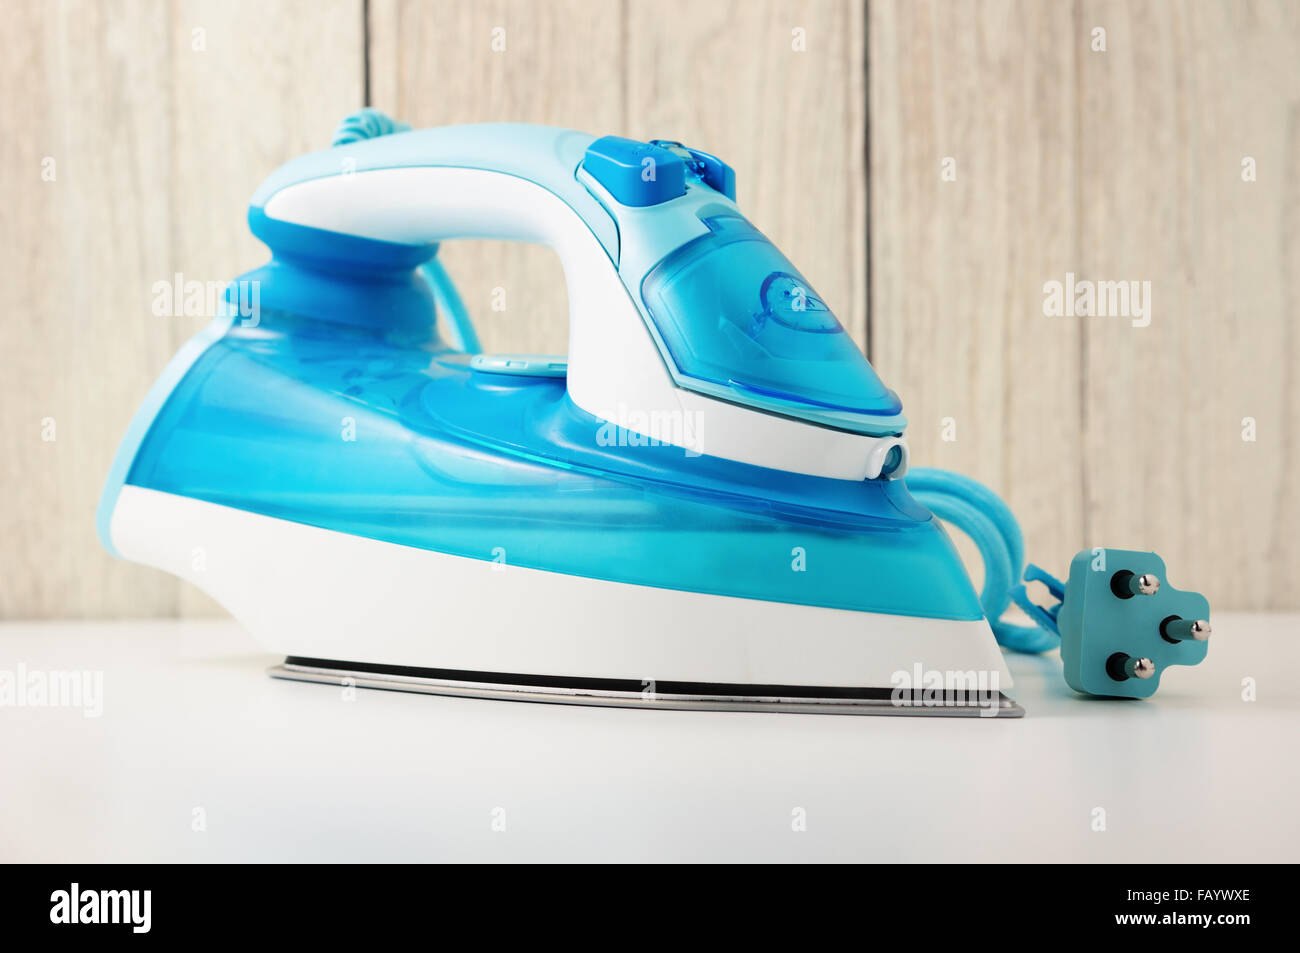 Steam iron on white table with wood wall background Stock Photo